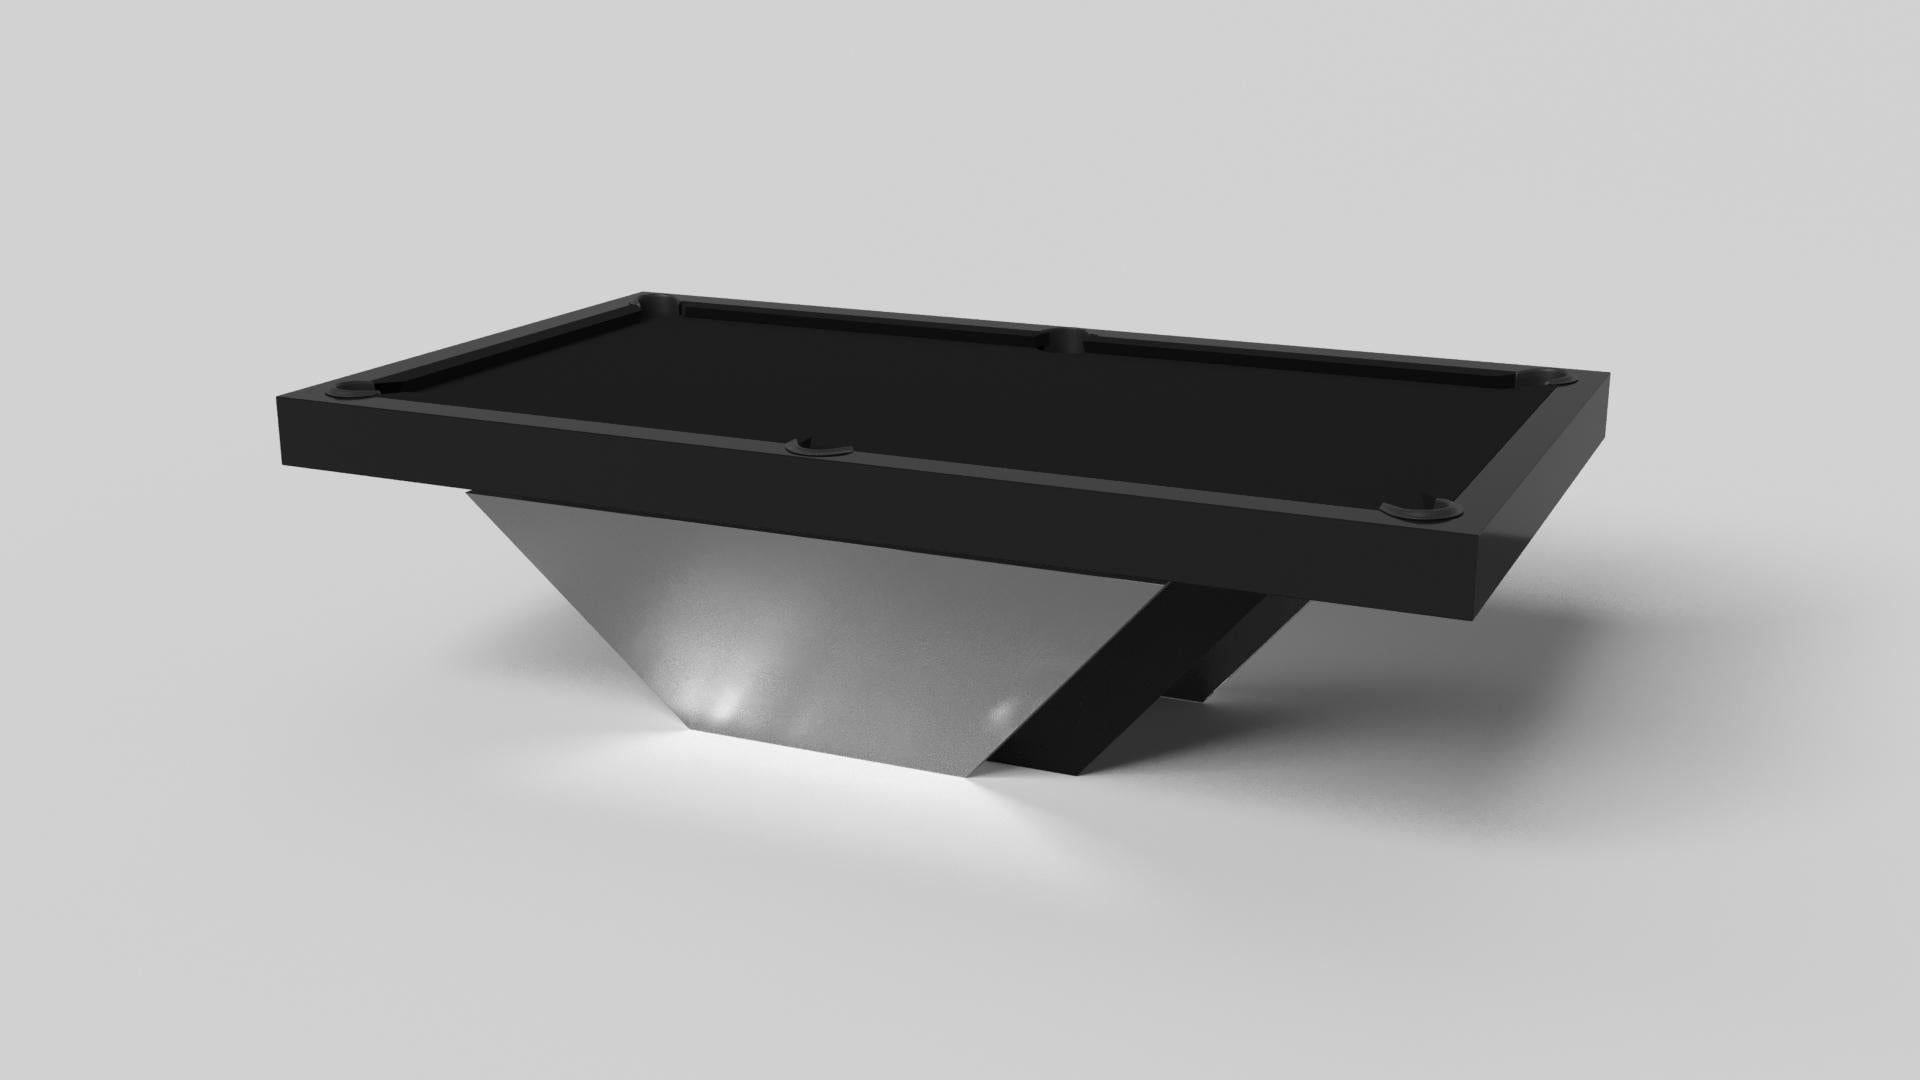 Handcrafted with clean lines, sharp angles, and a pyramid base, the Vogue pool table in chrome with black strikes the perfect balance between sport-inspired style and contemporary design. Timeless in its appeal and revered for its practicality and